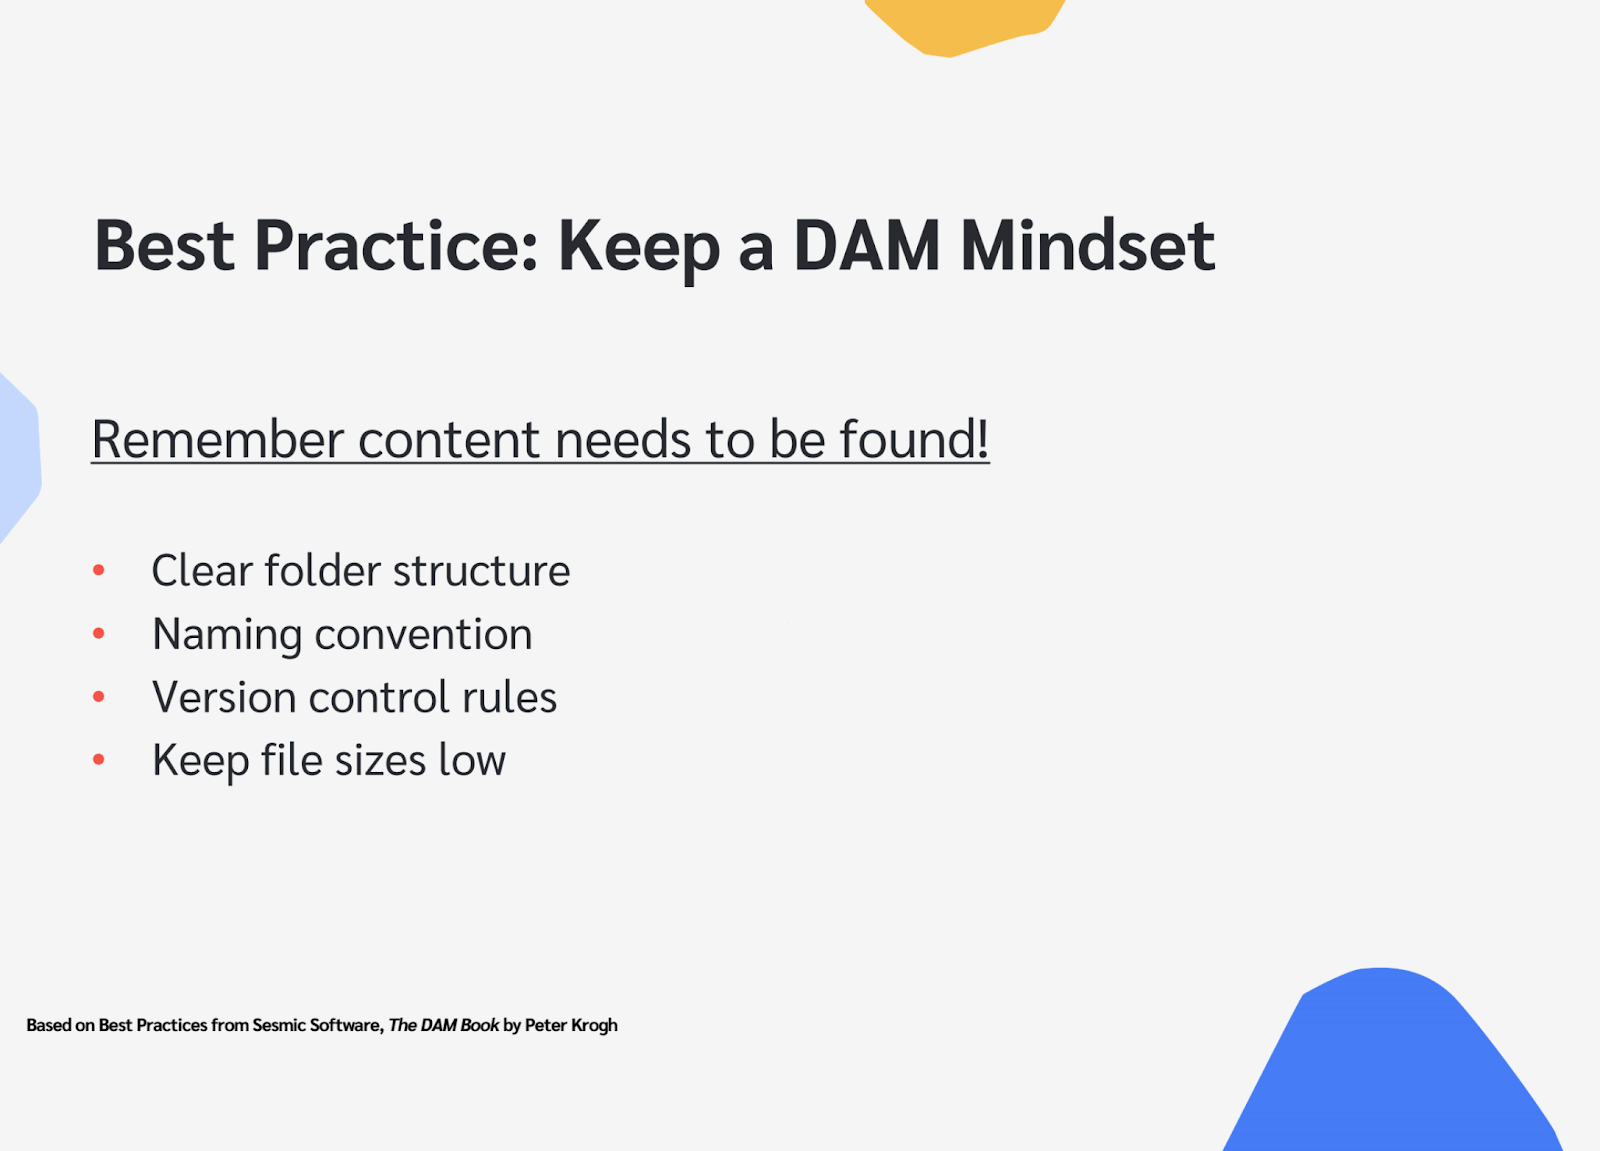 Establish and maintain a DAM mindset throughout the sales enablement process.